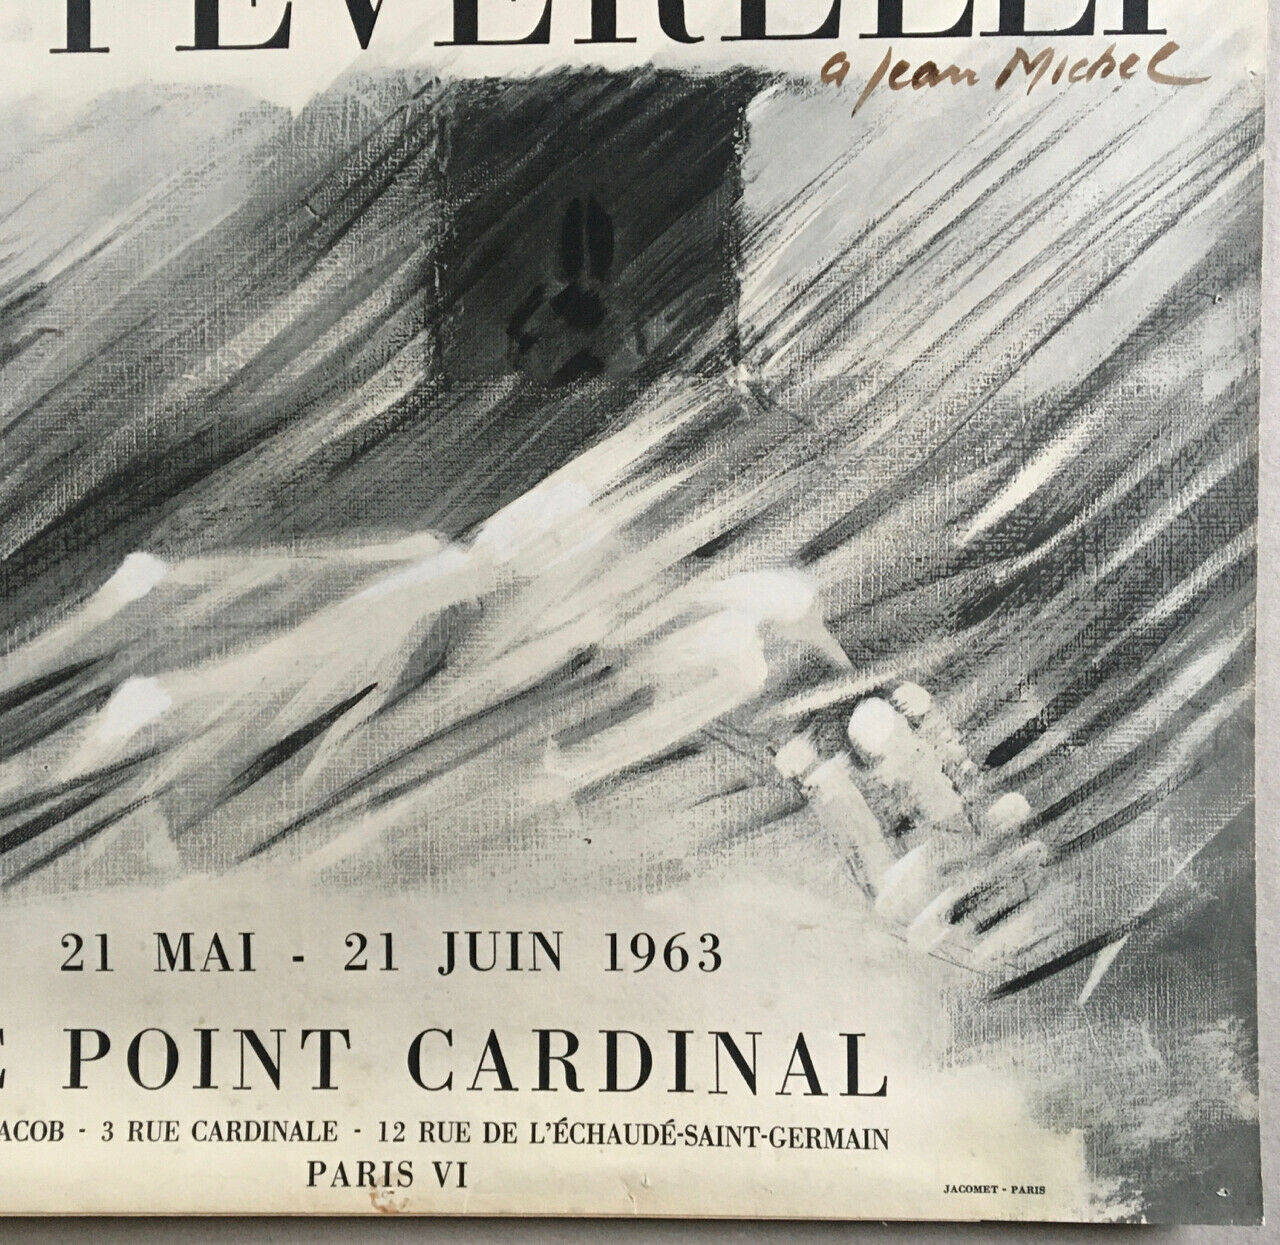 Peverelli — Signed exhibition poster — Jacomet — Le Point Cardinal — 1963.